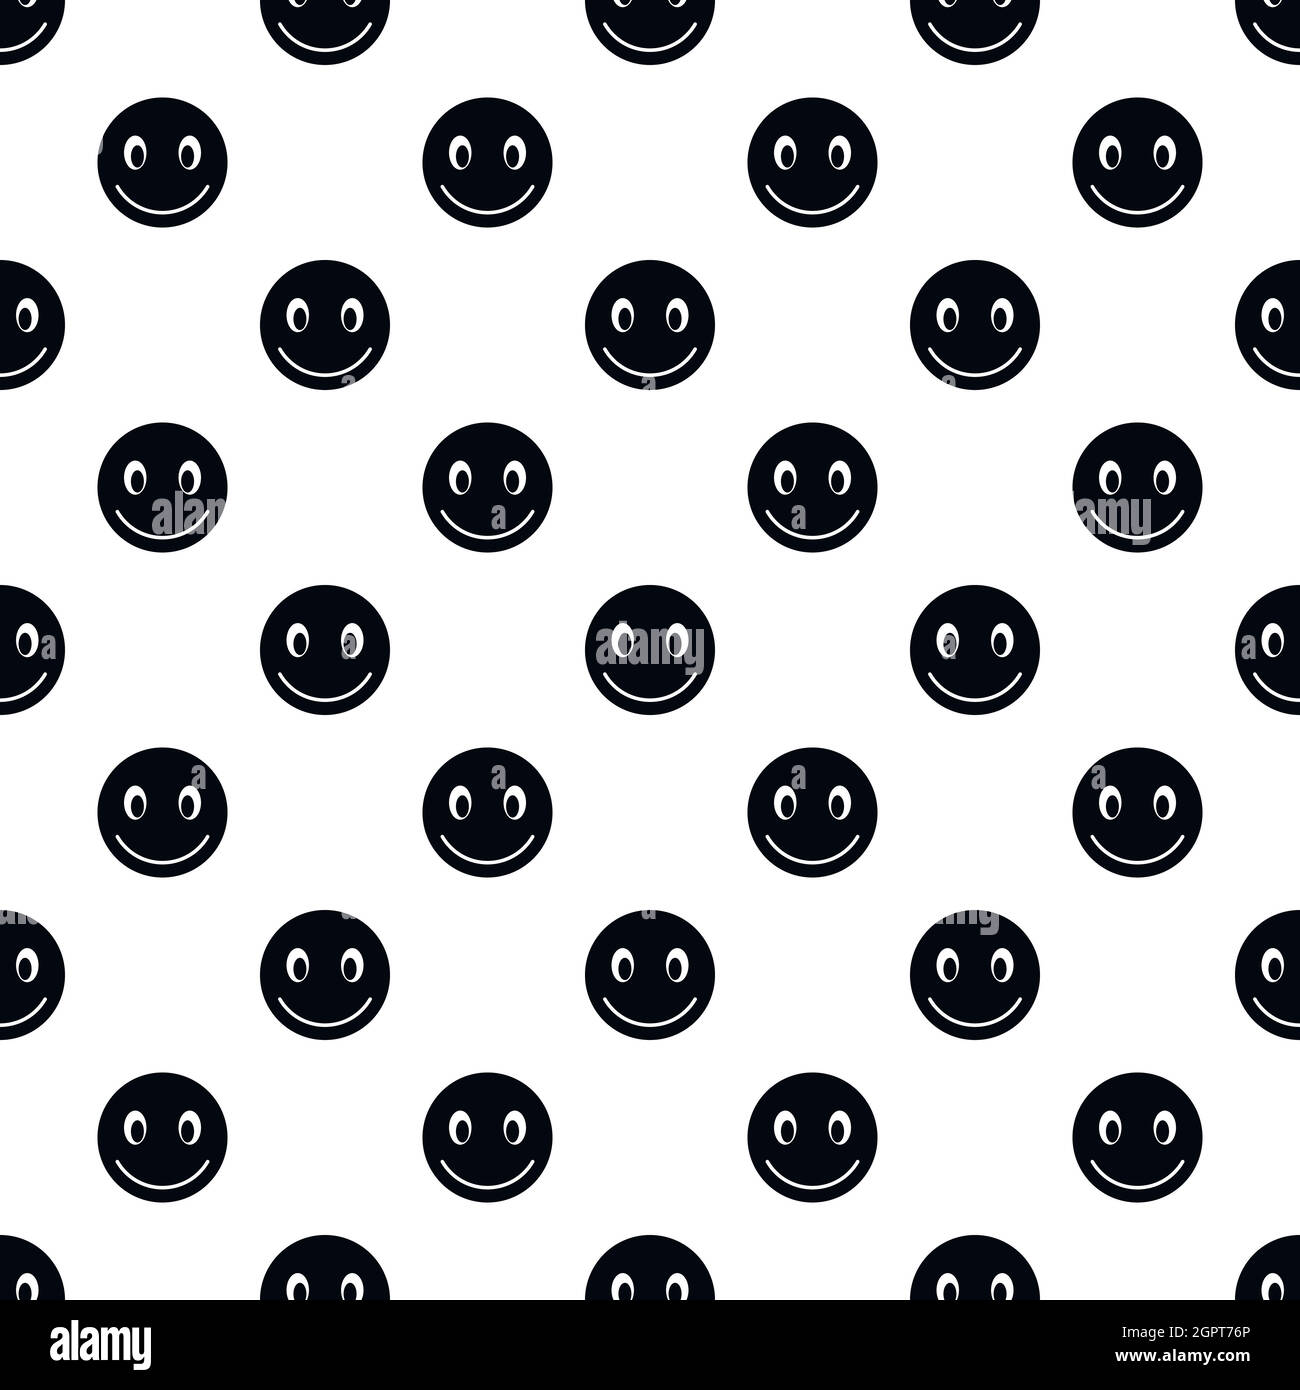 Smiley face pattern, simple style Stock Vector